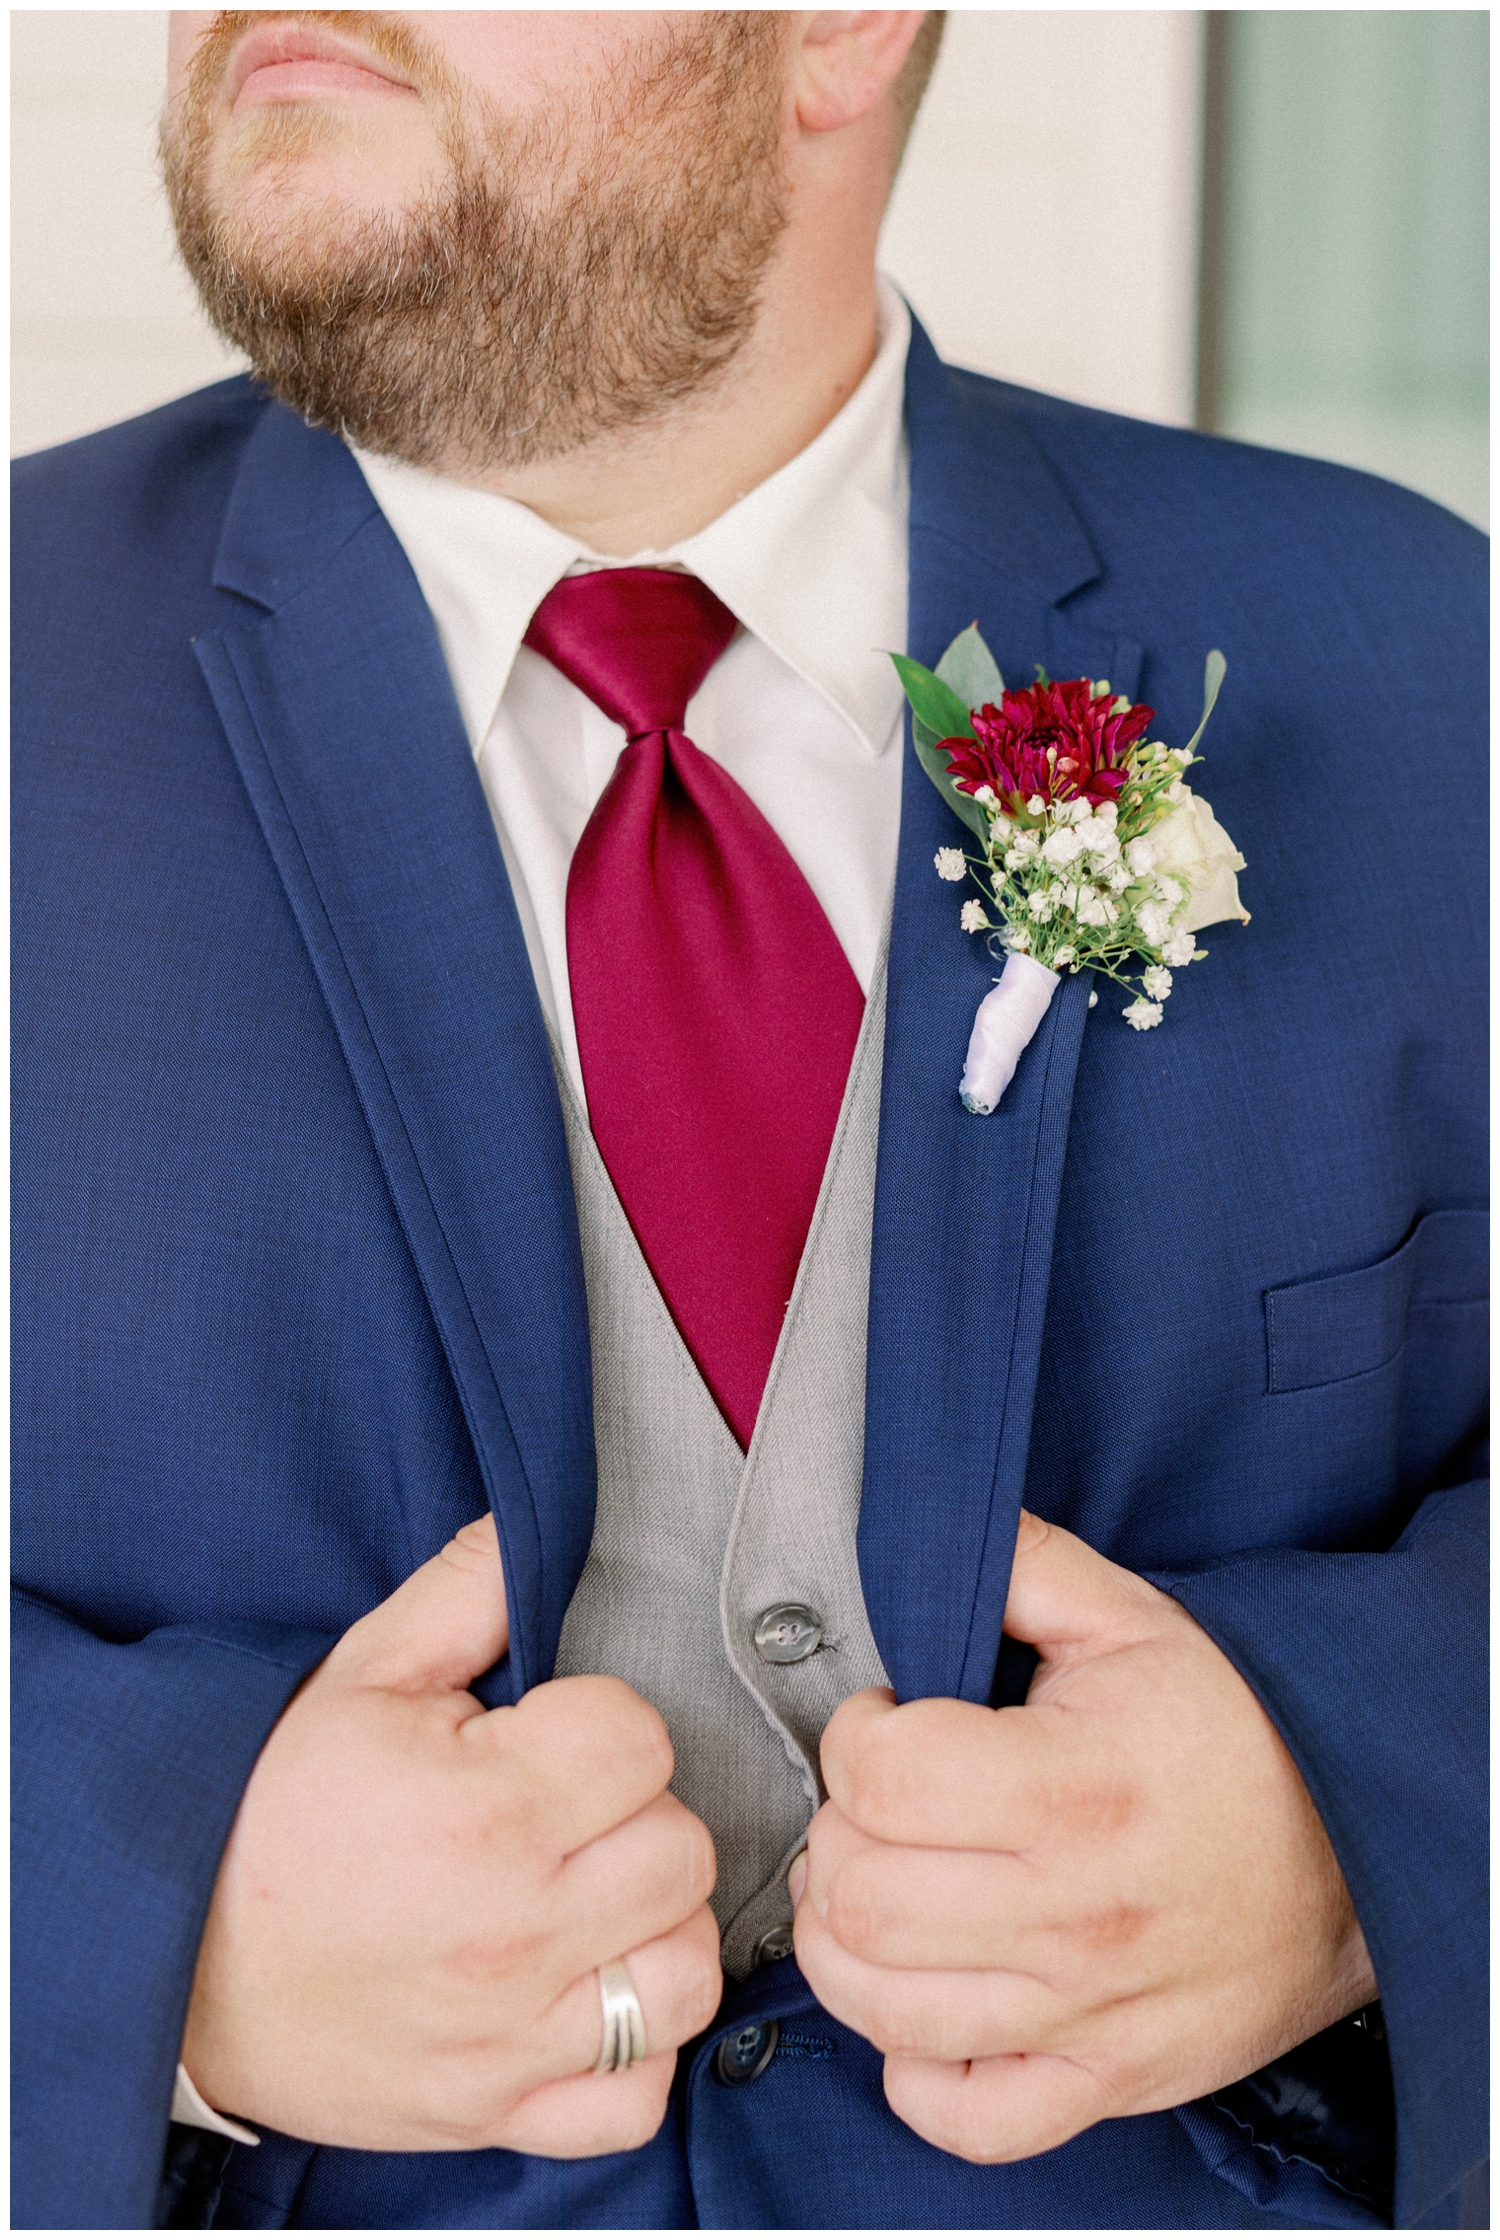 detail image of groom holding his blue jacket